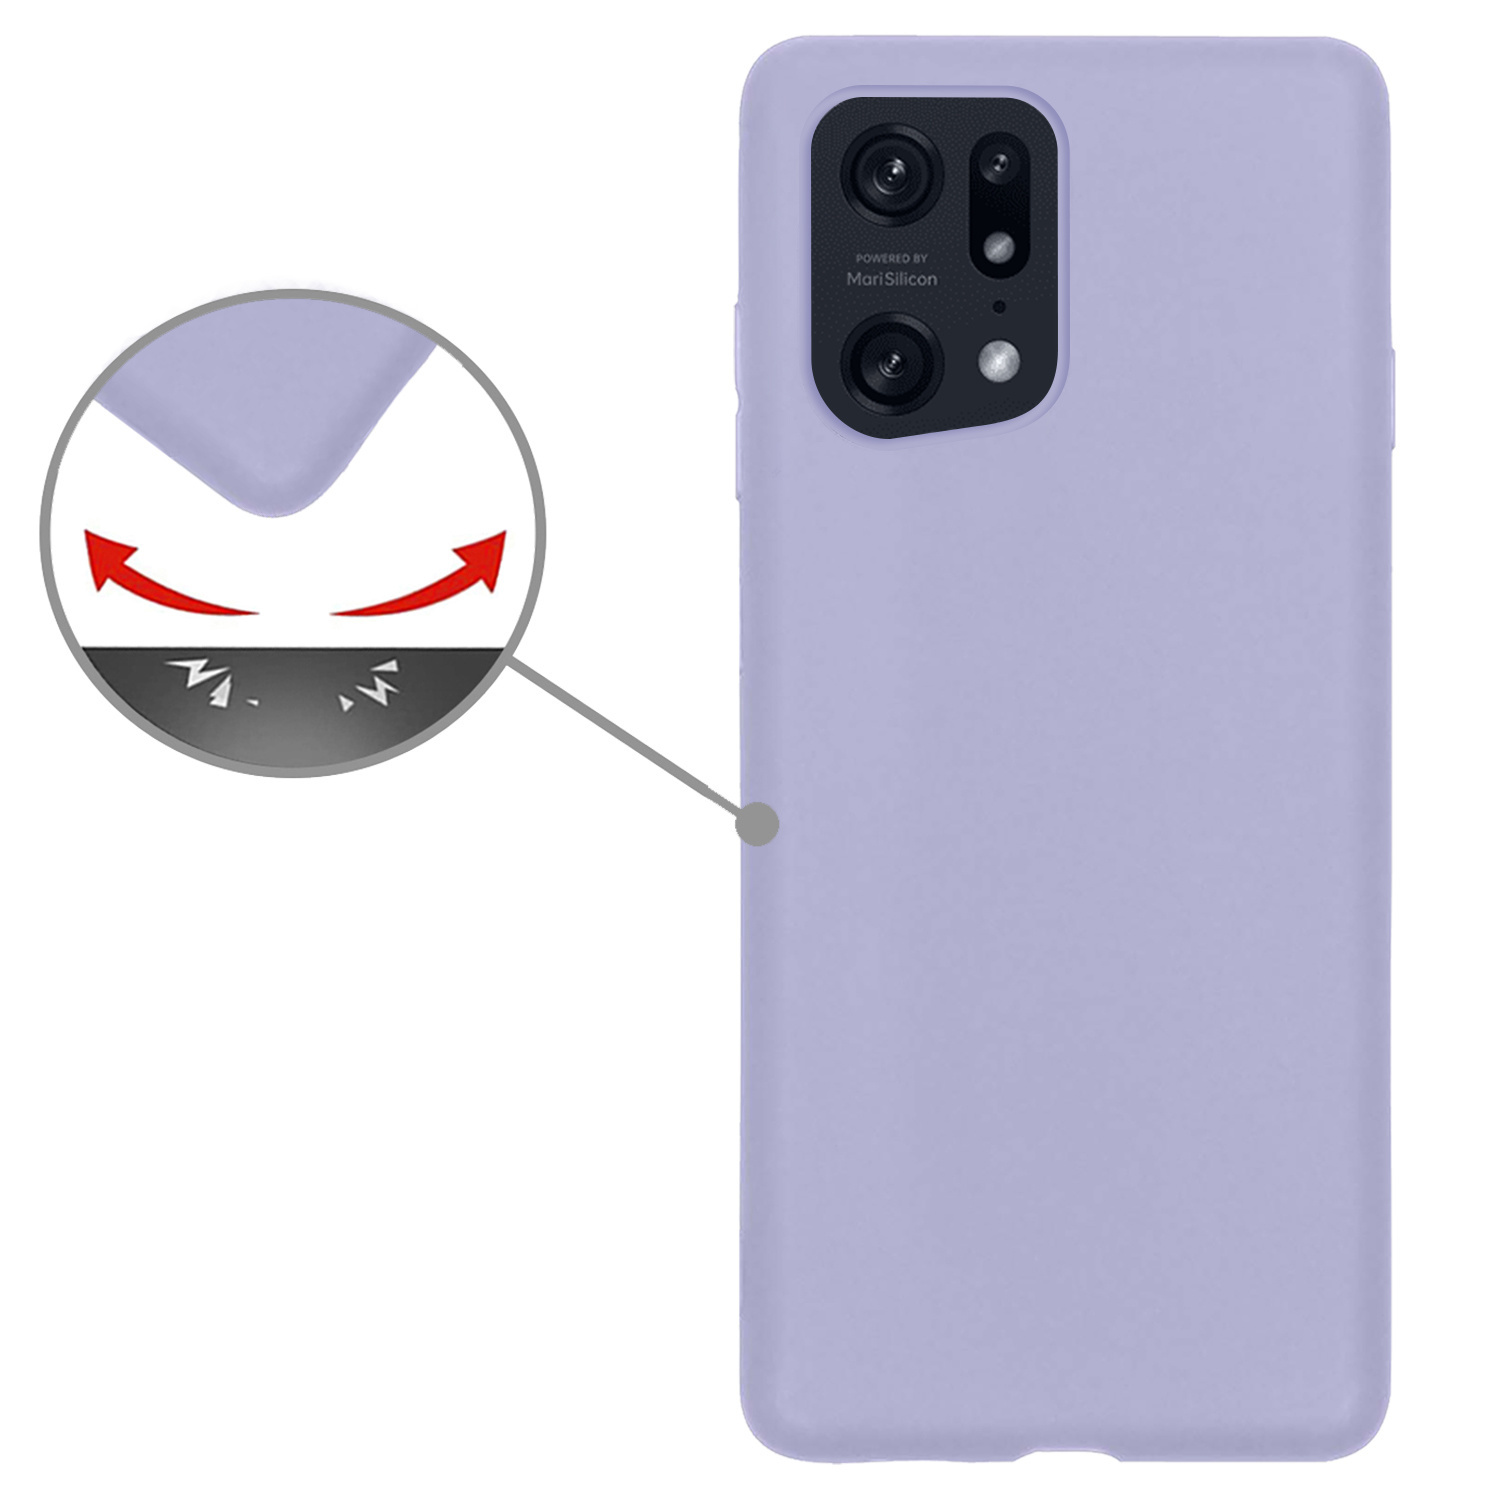 Nomfy OPPO Find X5 Pro Hoesje Siliconen Case Back Cover Met 2x Screenprotector - OPPO Find X5 Pro Hoes Cover Silicone - Lila